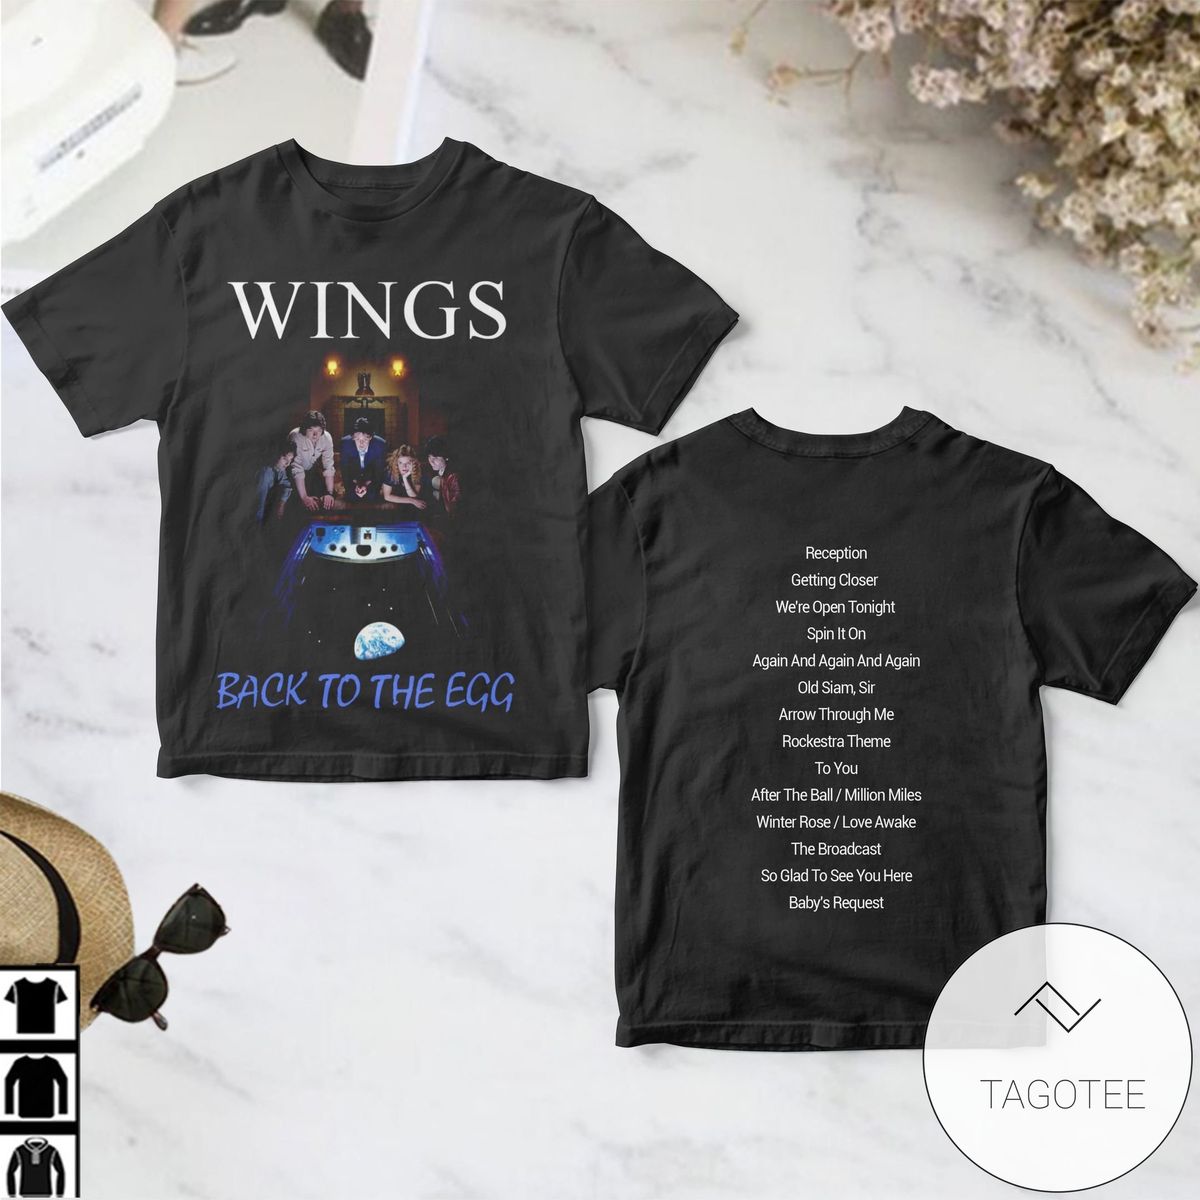 Paul Mccartney And Wings Back To The Egg Album Cover Shirt